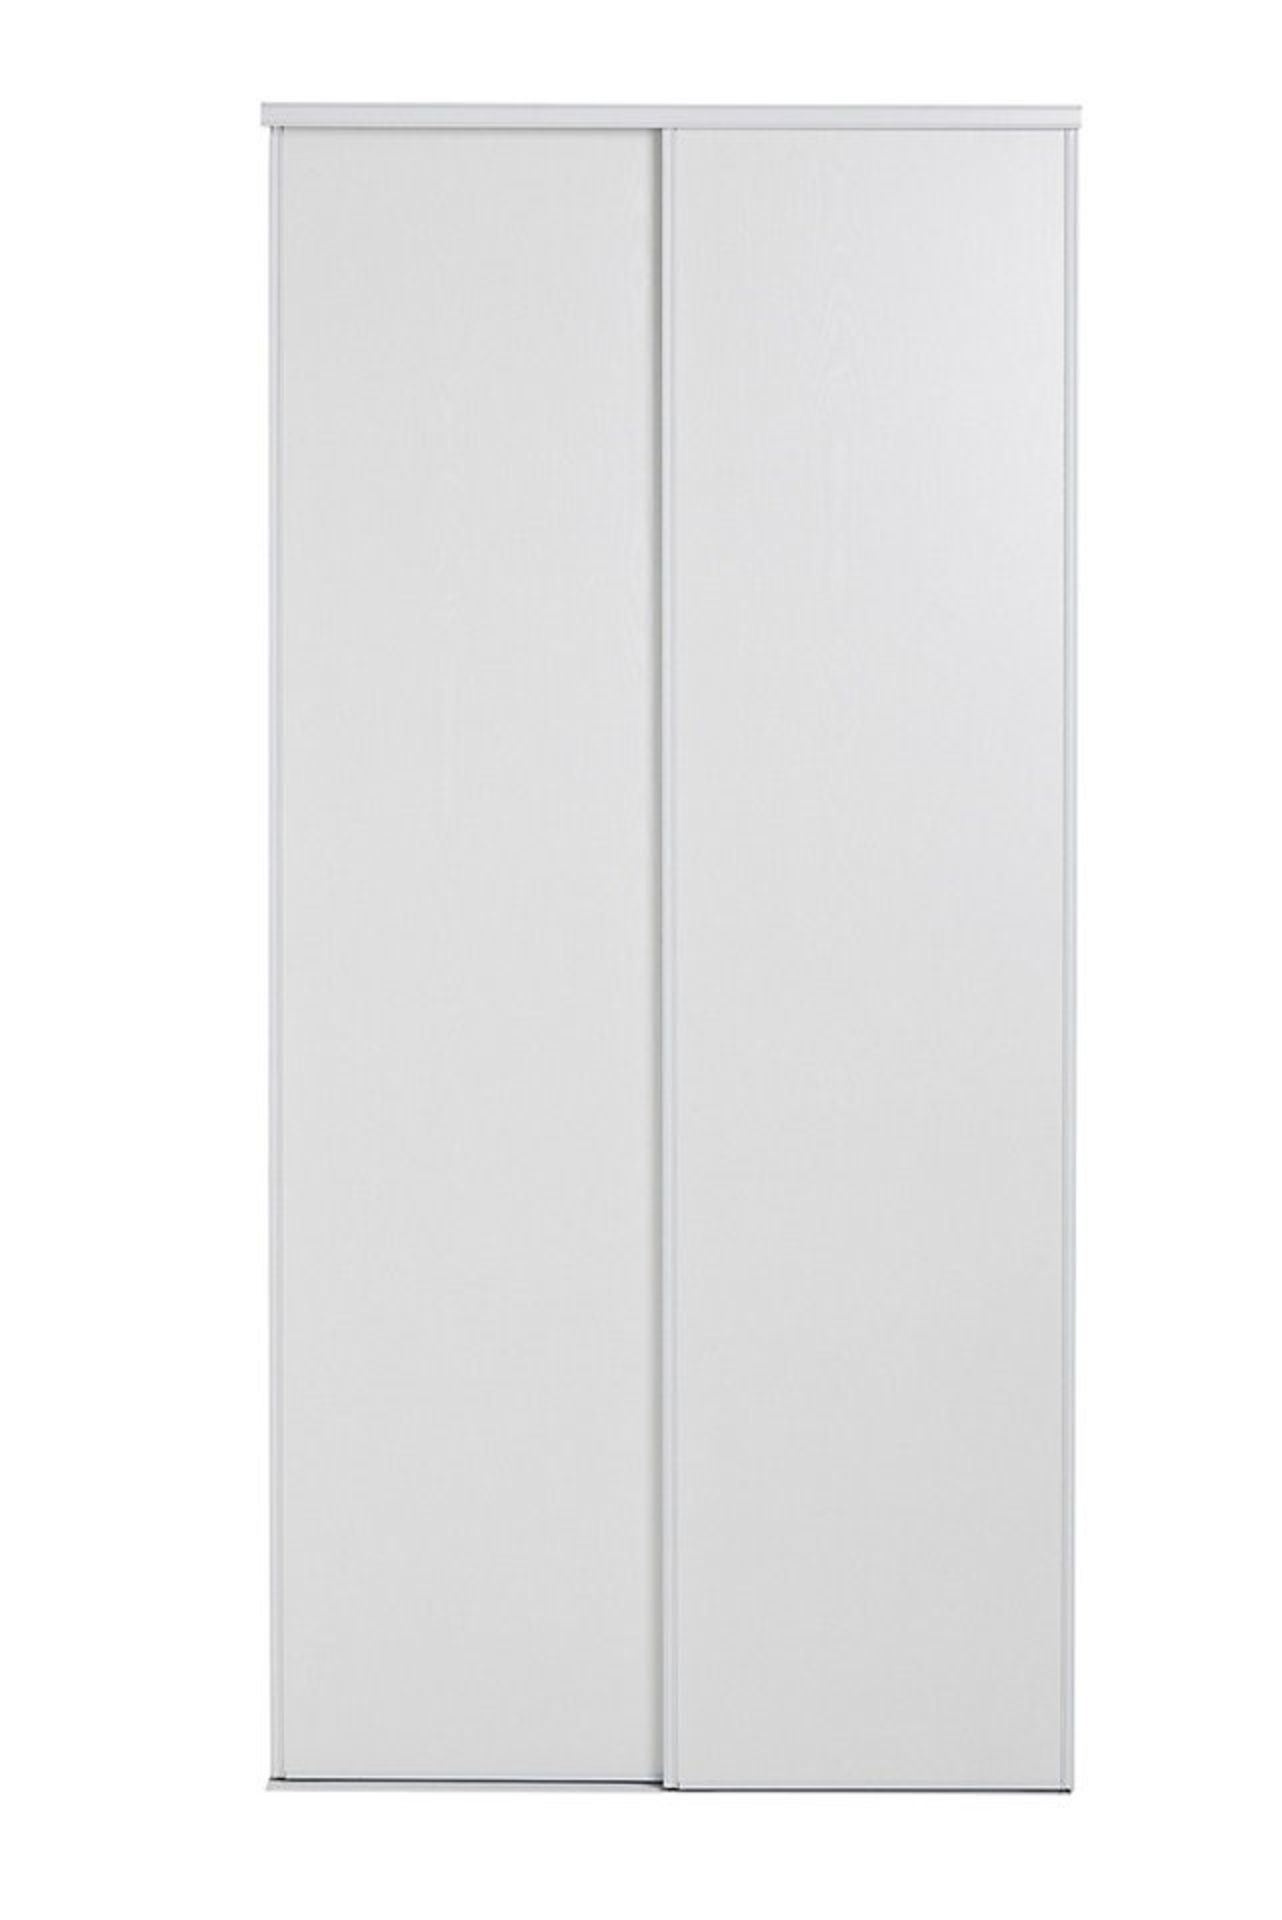 1 x BLIZZ Pack of 2 Sliding Wardrobe Doors In White Decorative Panel With White Lacquered Steel Trac - Image 3 of 4